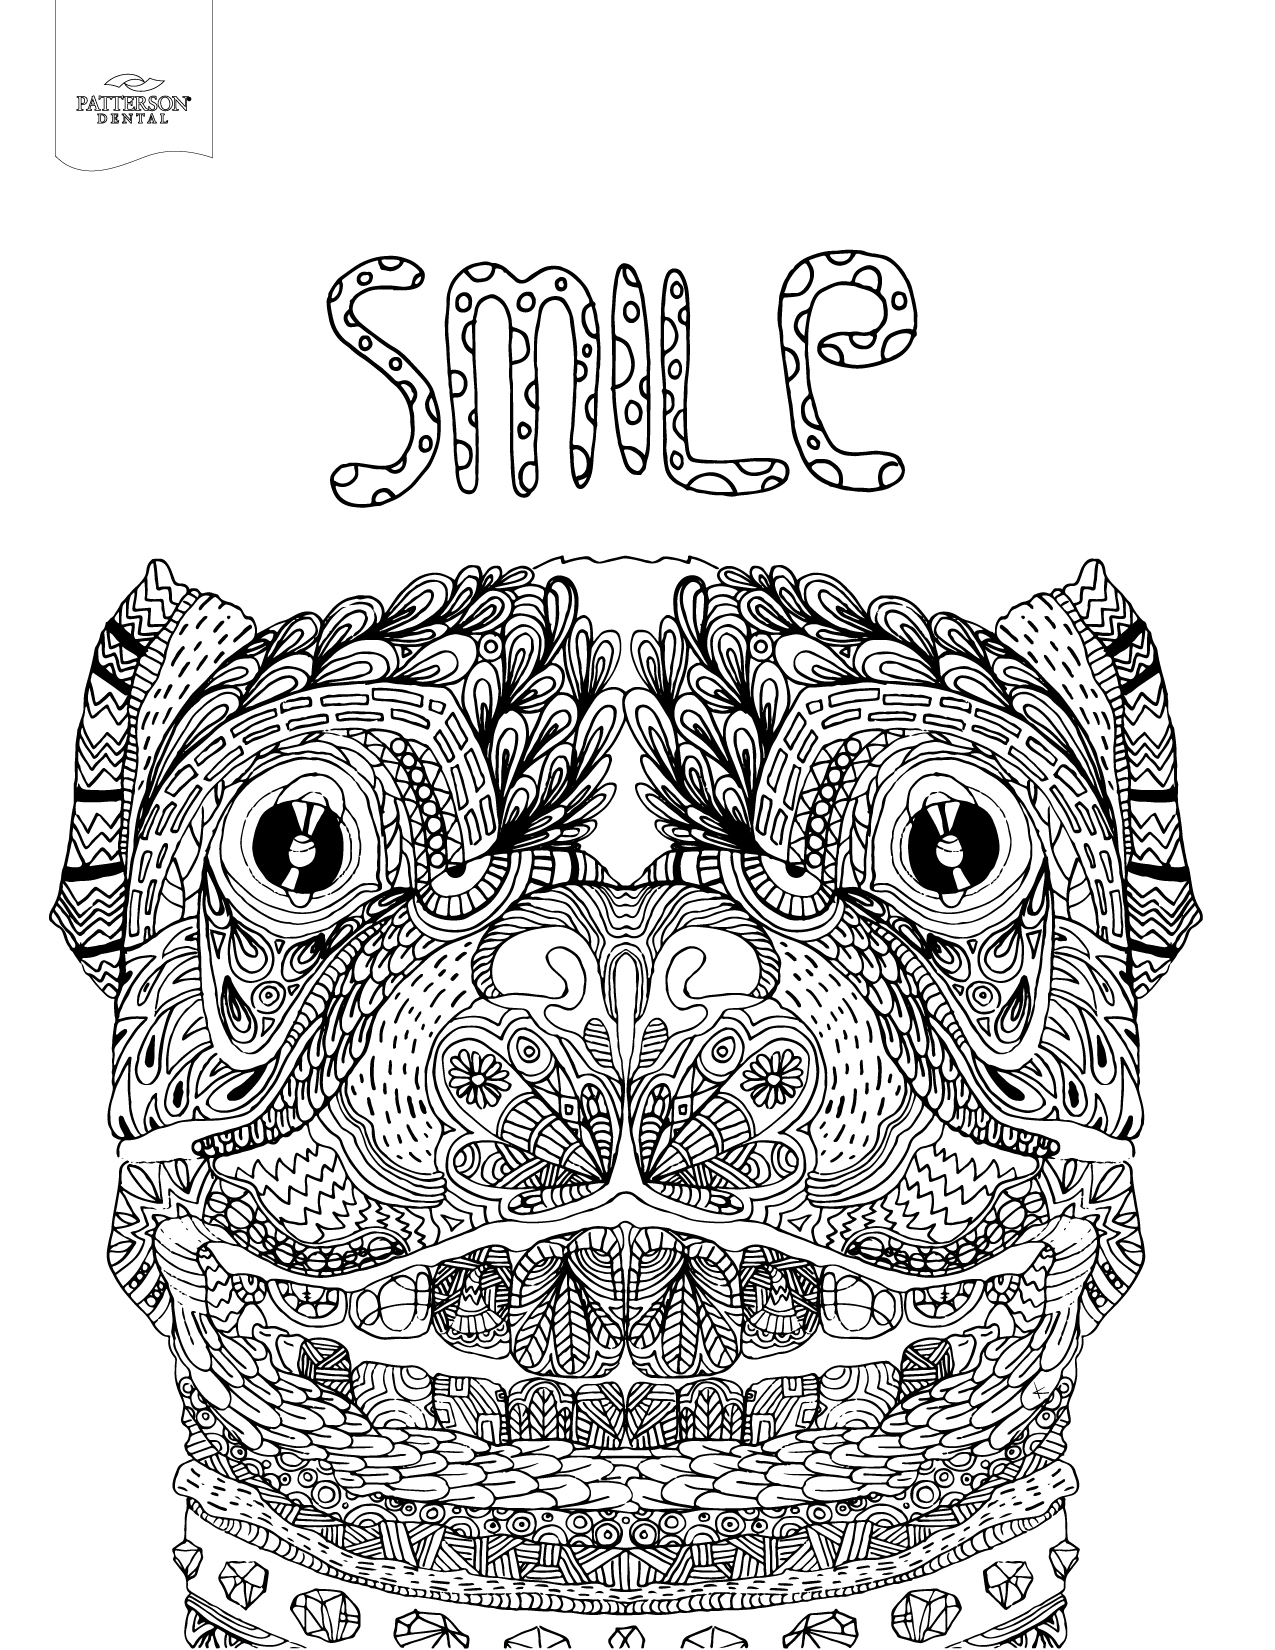 10 Toothy Adult Coloring Pages [Printable] - Off the Cusp